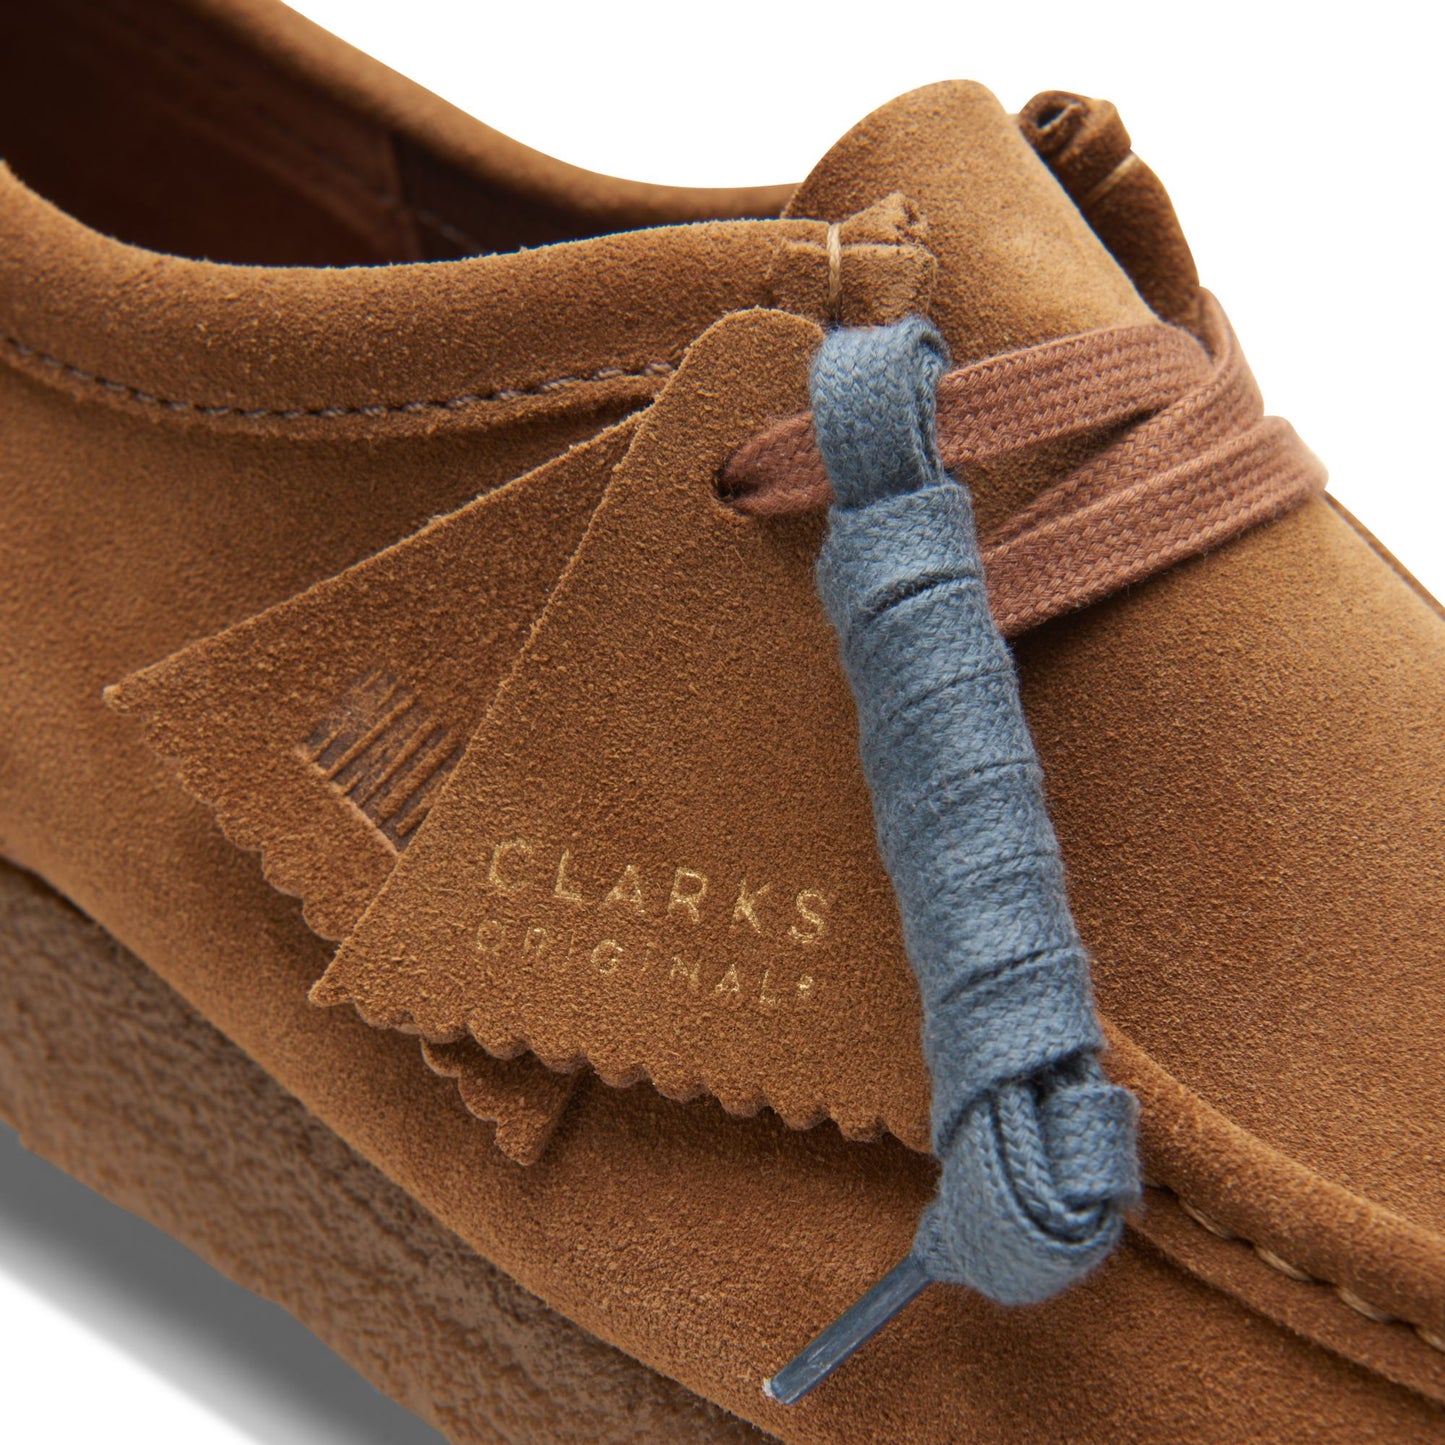 CLARKS WALLABEE LACE-UP SHOE - COLA